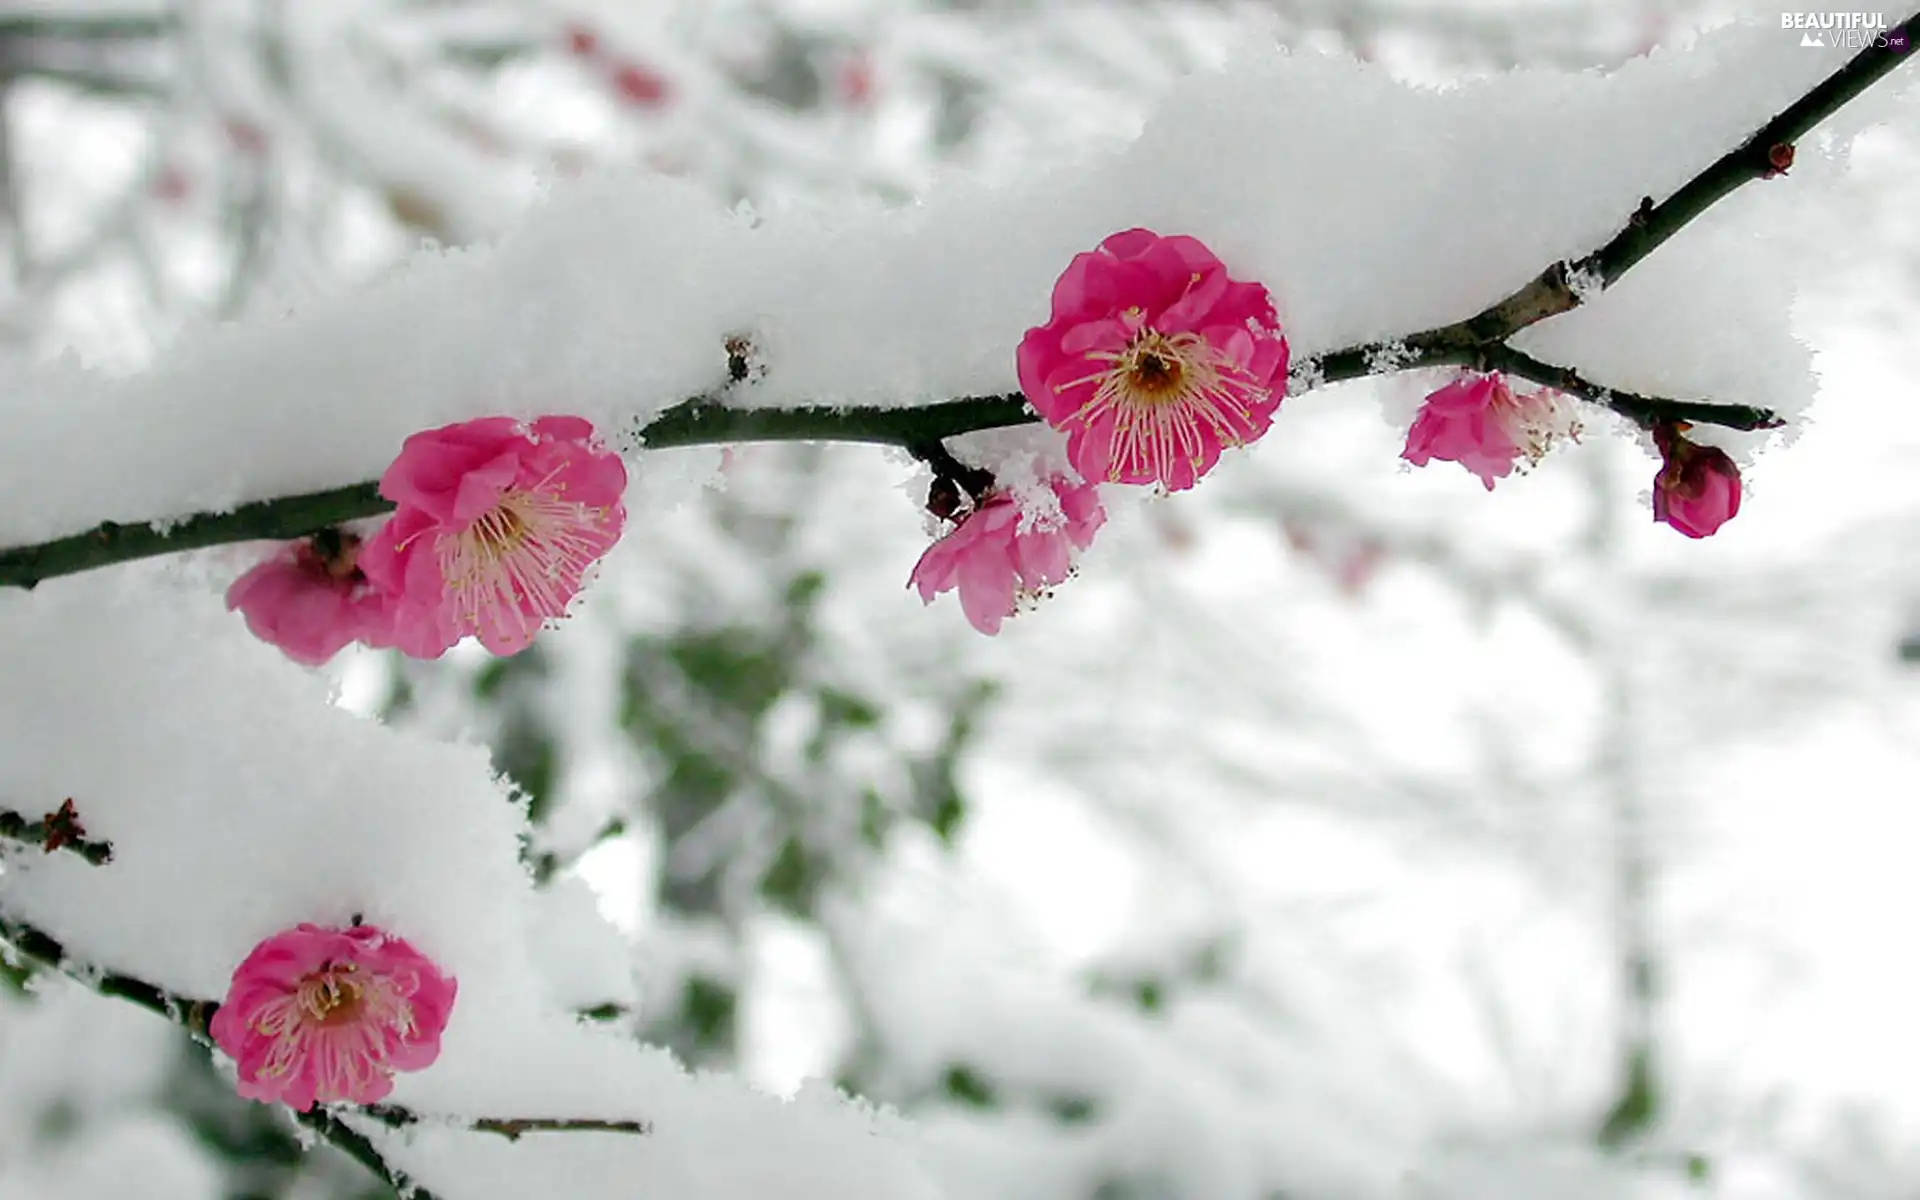 Flowers, A snow-covered, branch